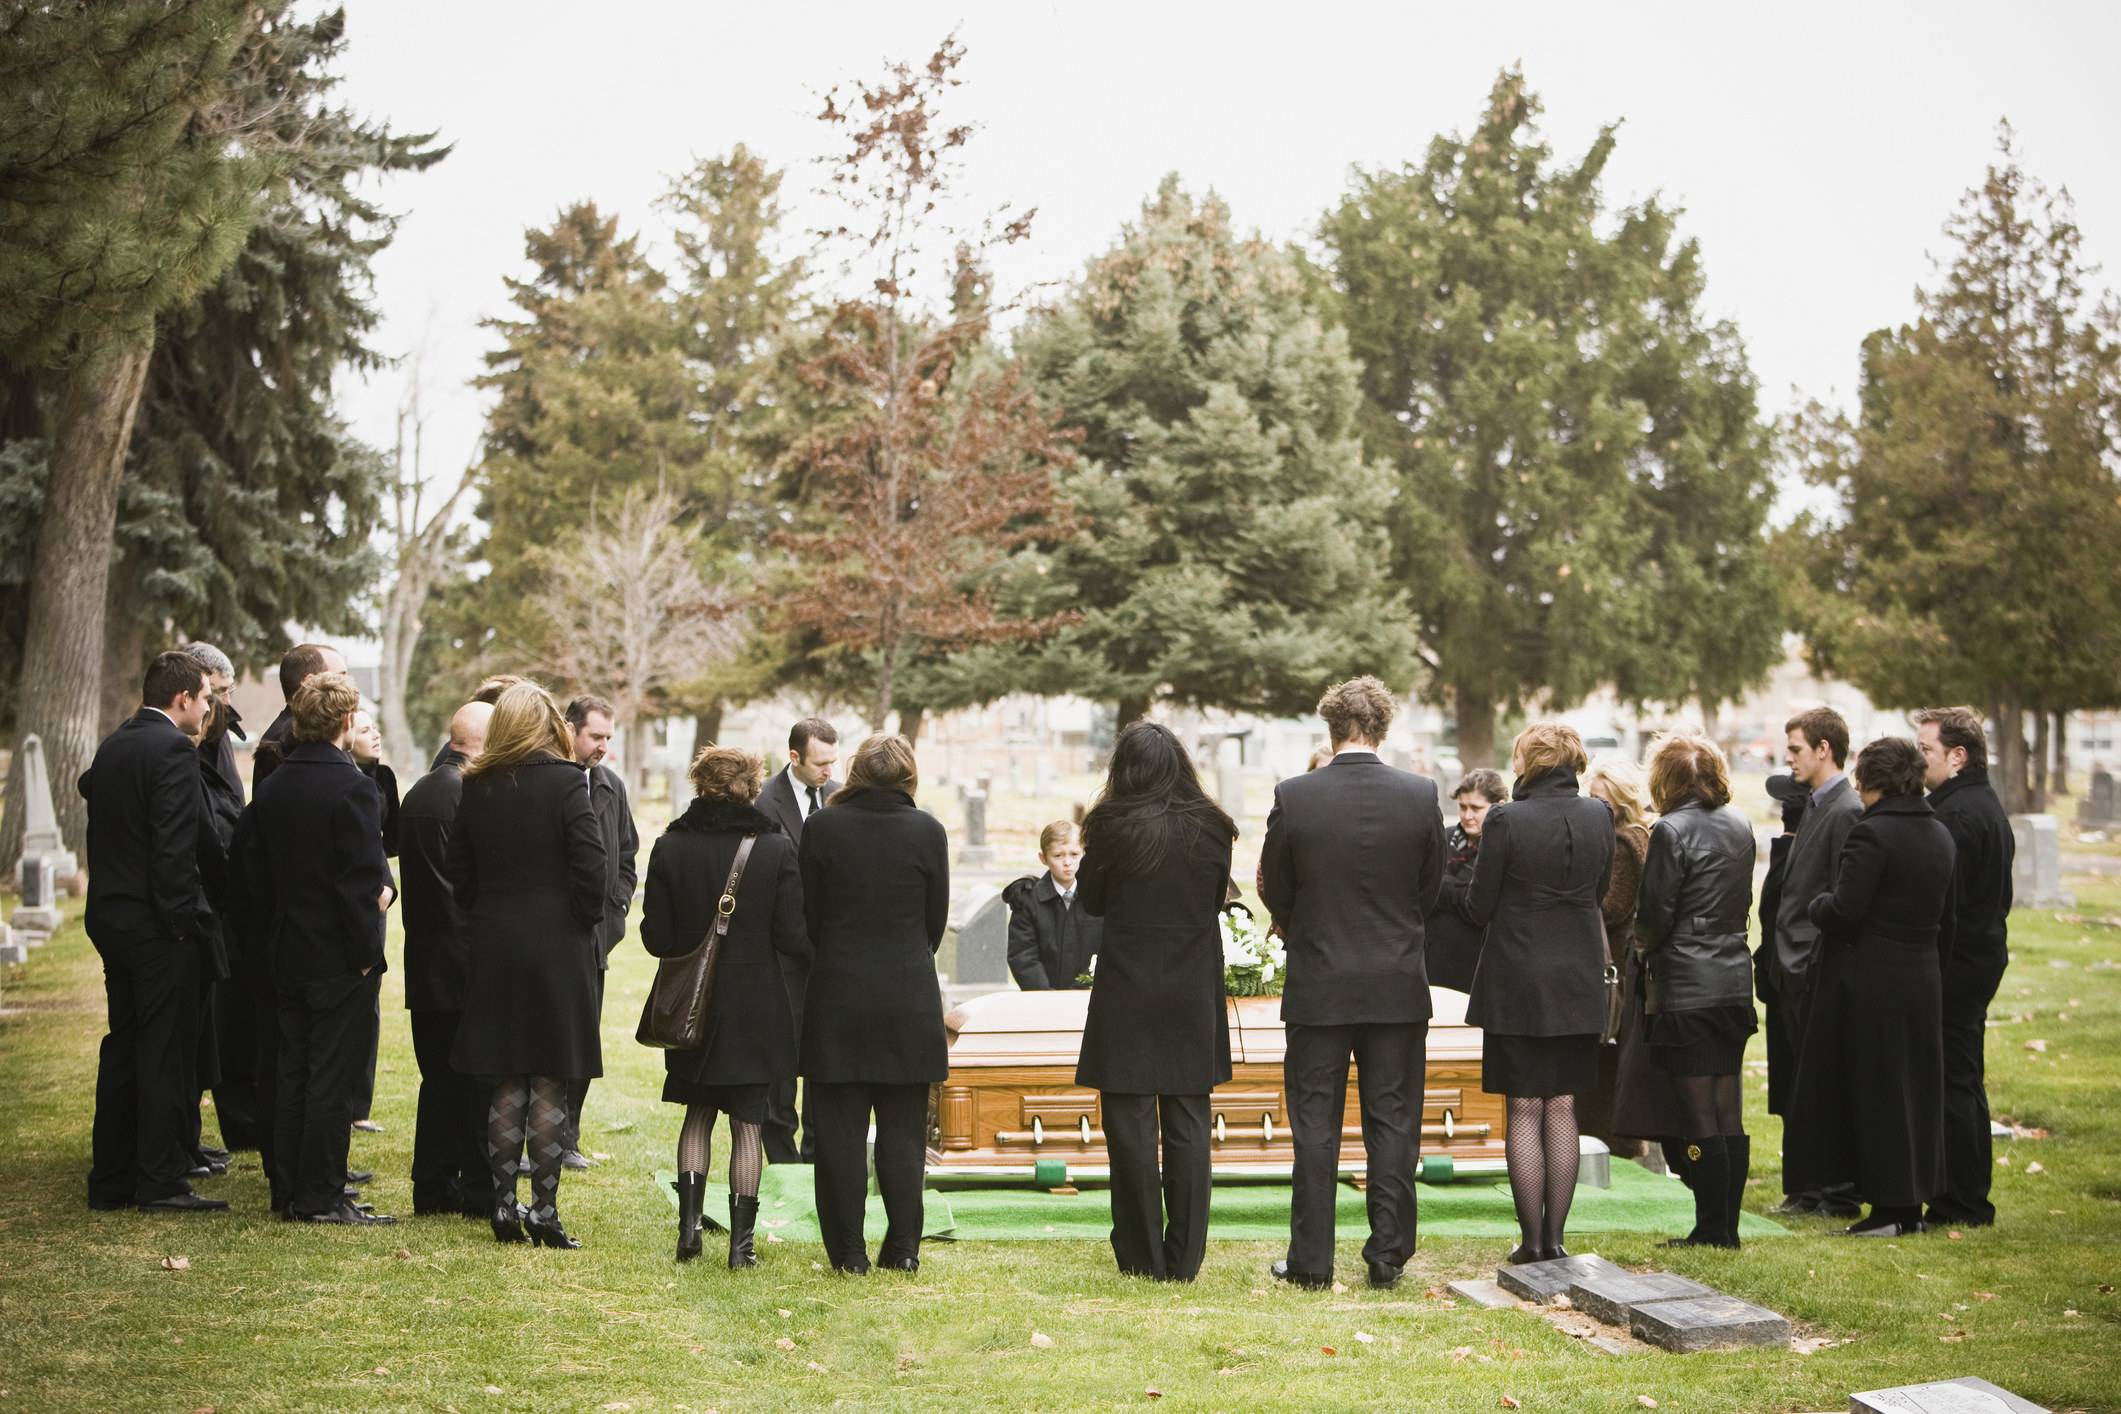 A group of people at a funeral.